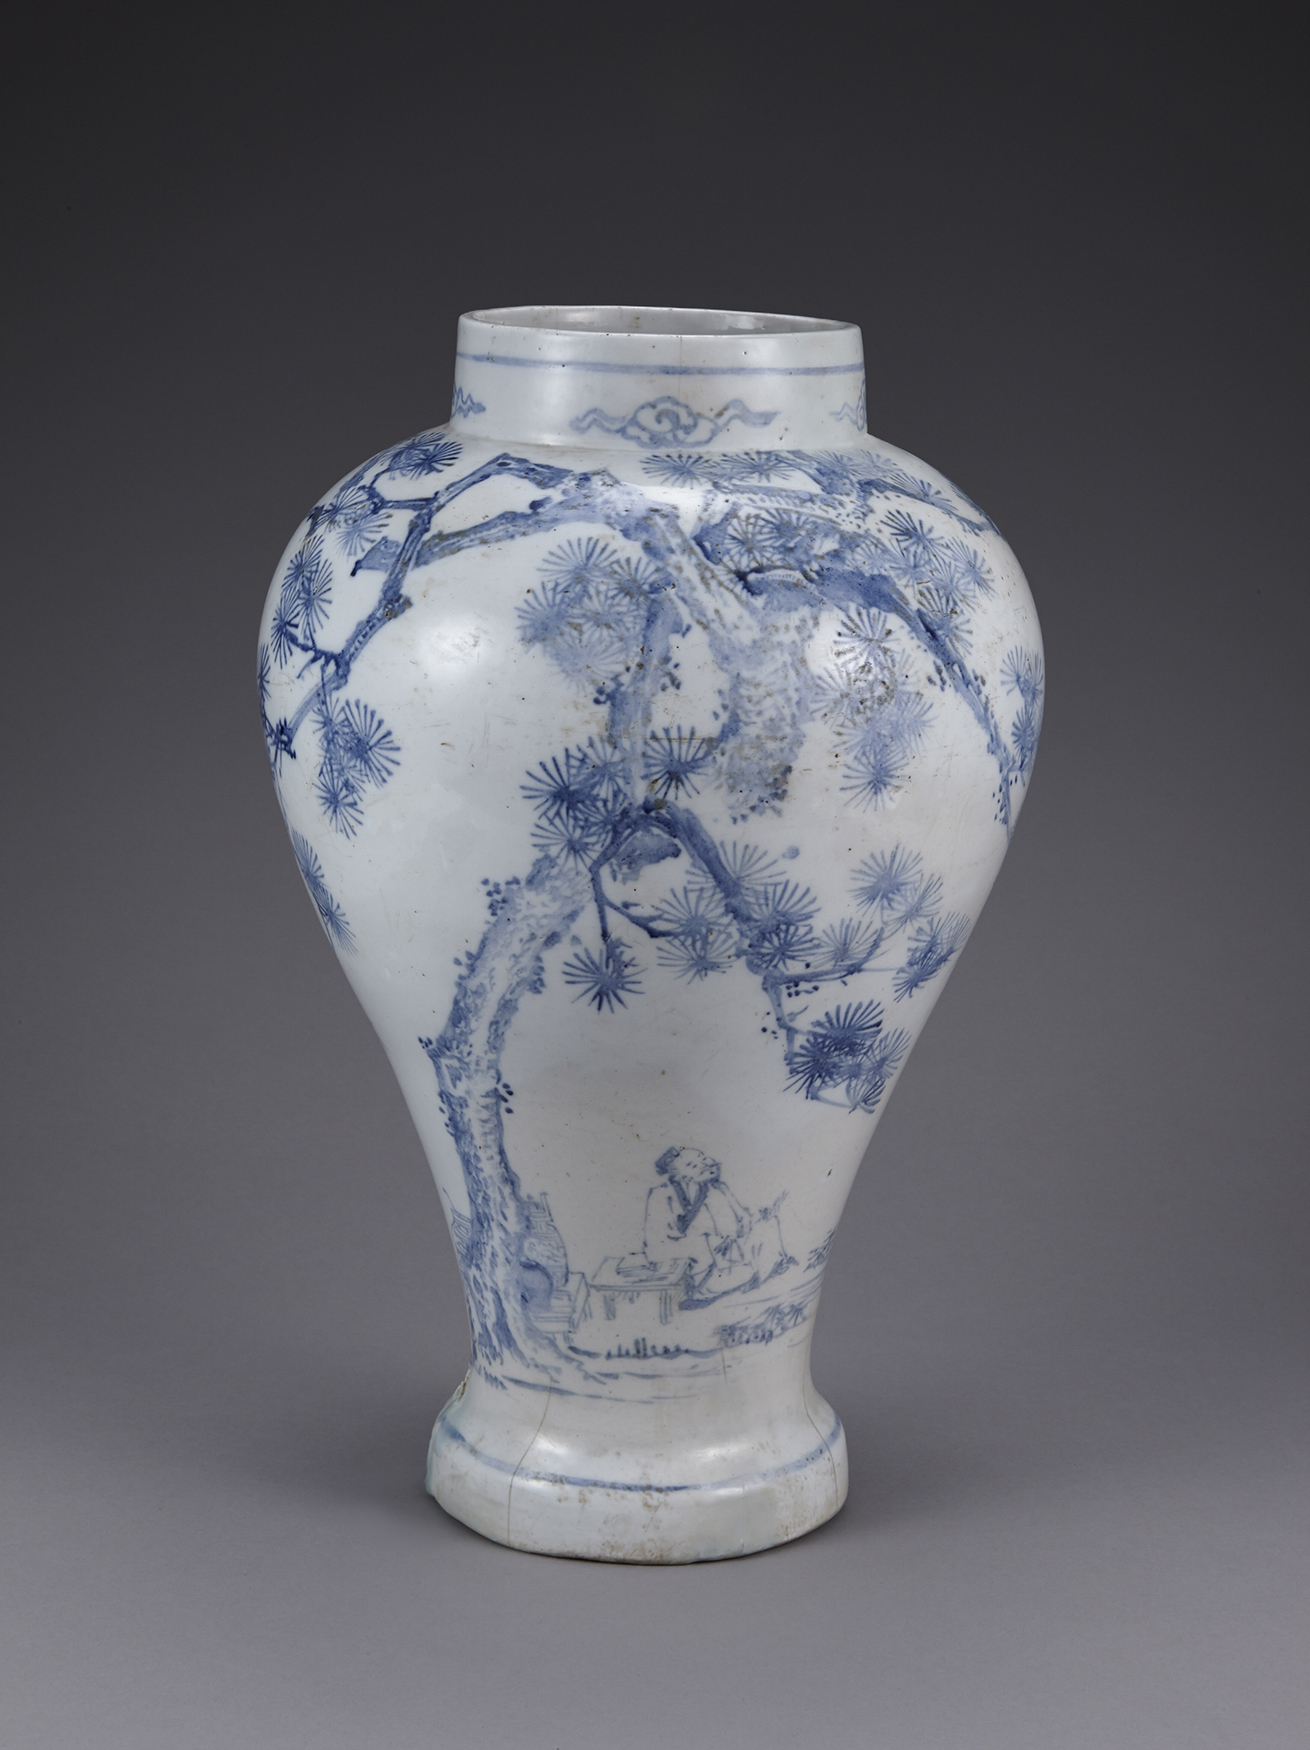 Jar with Pine Tree, Bamboo and Figure Design in Underglaze Blue